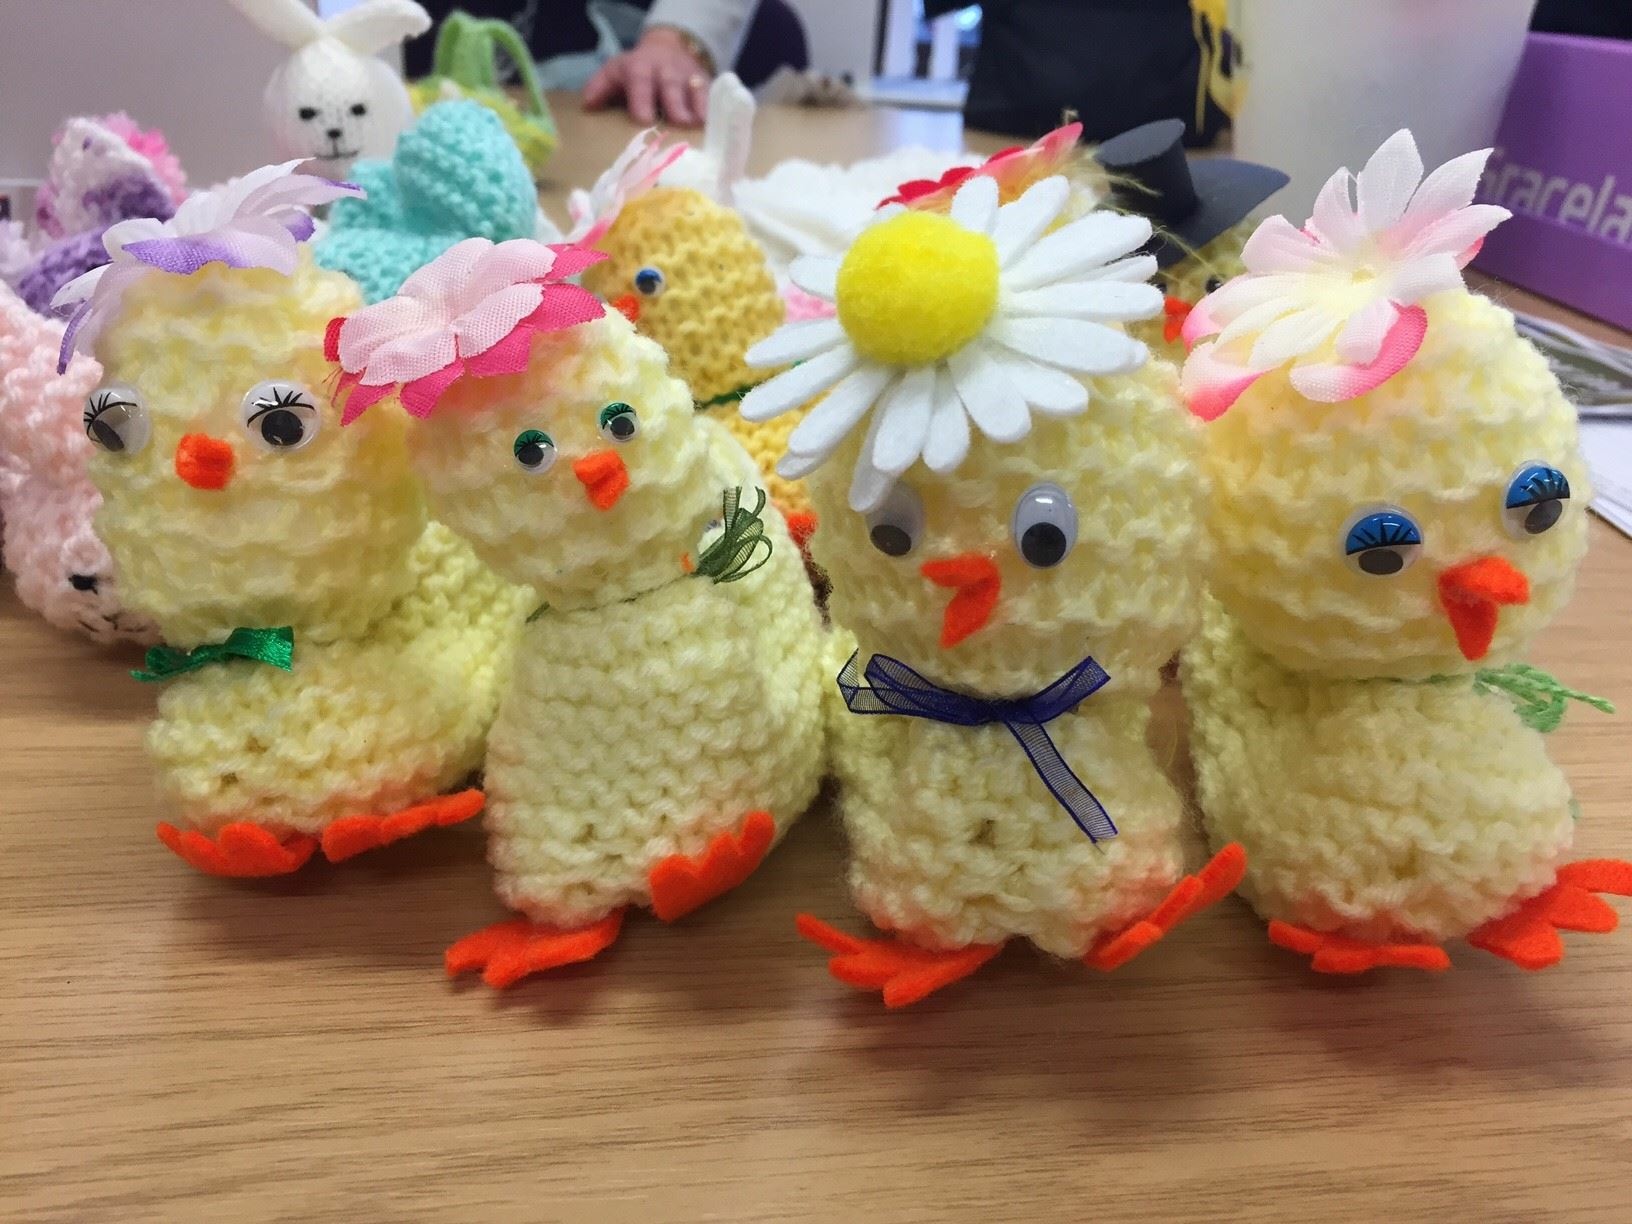 Calling all knitters!! - The Medway Hospital Charity